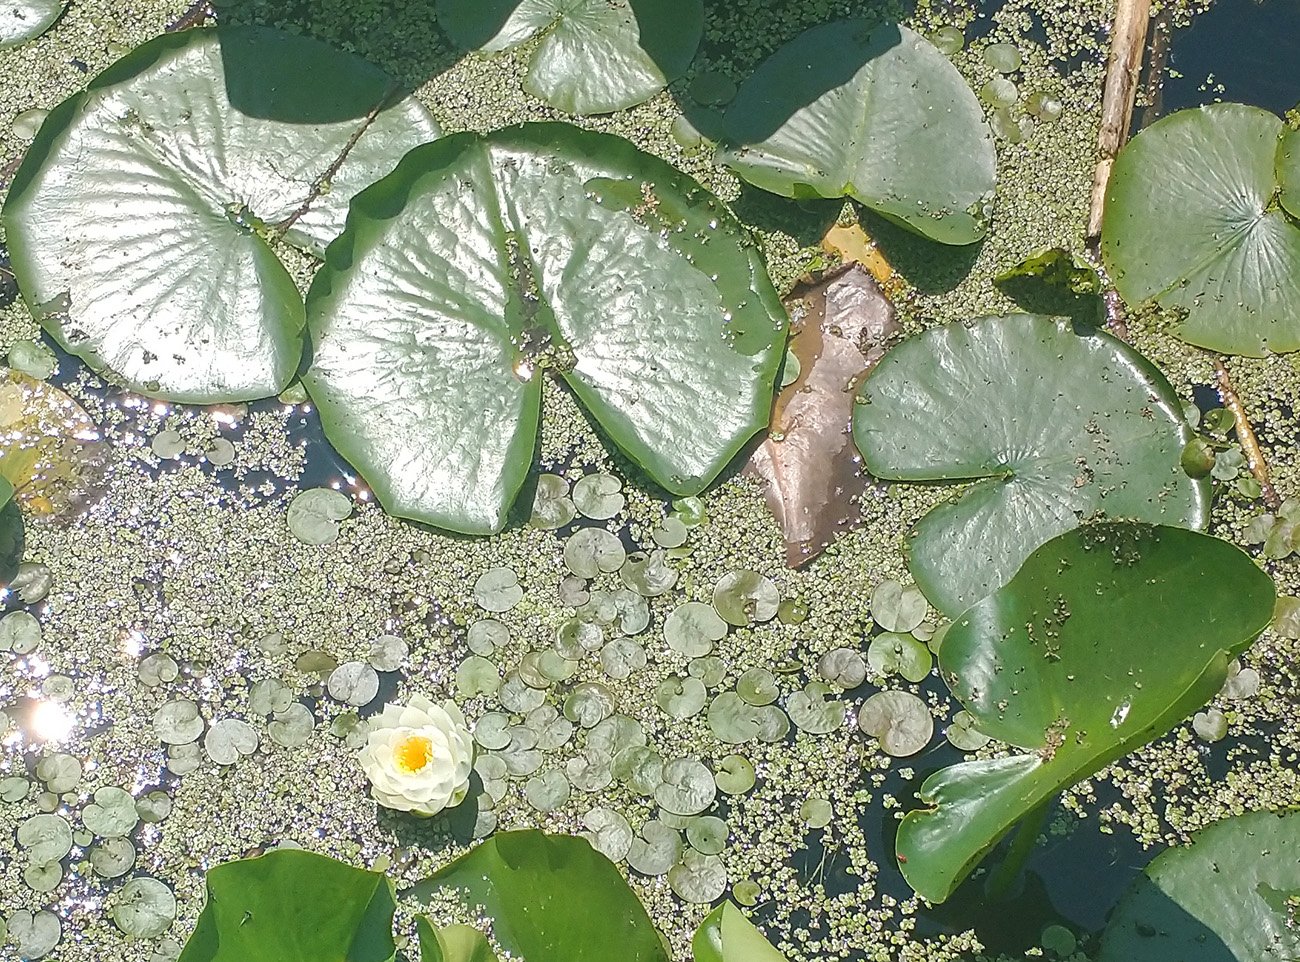 What makes you a pond is that you're covered in Water Lillies